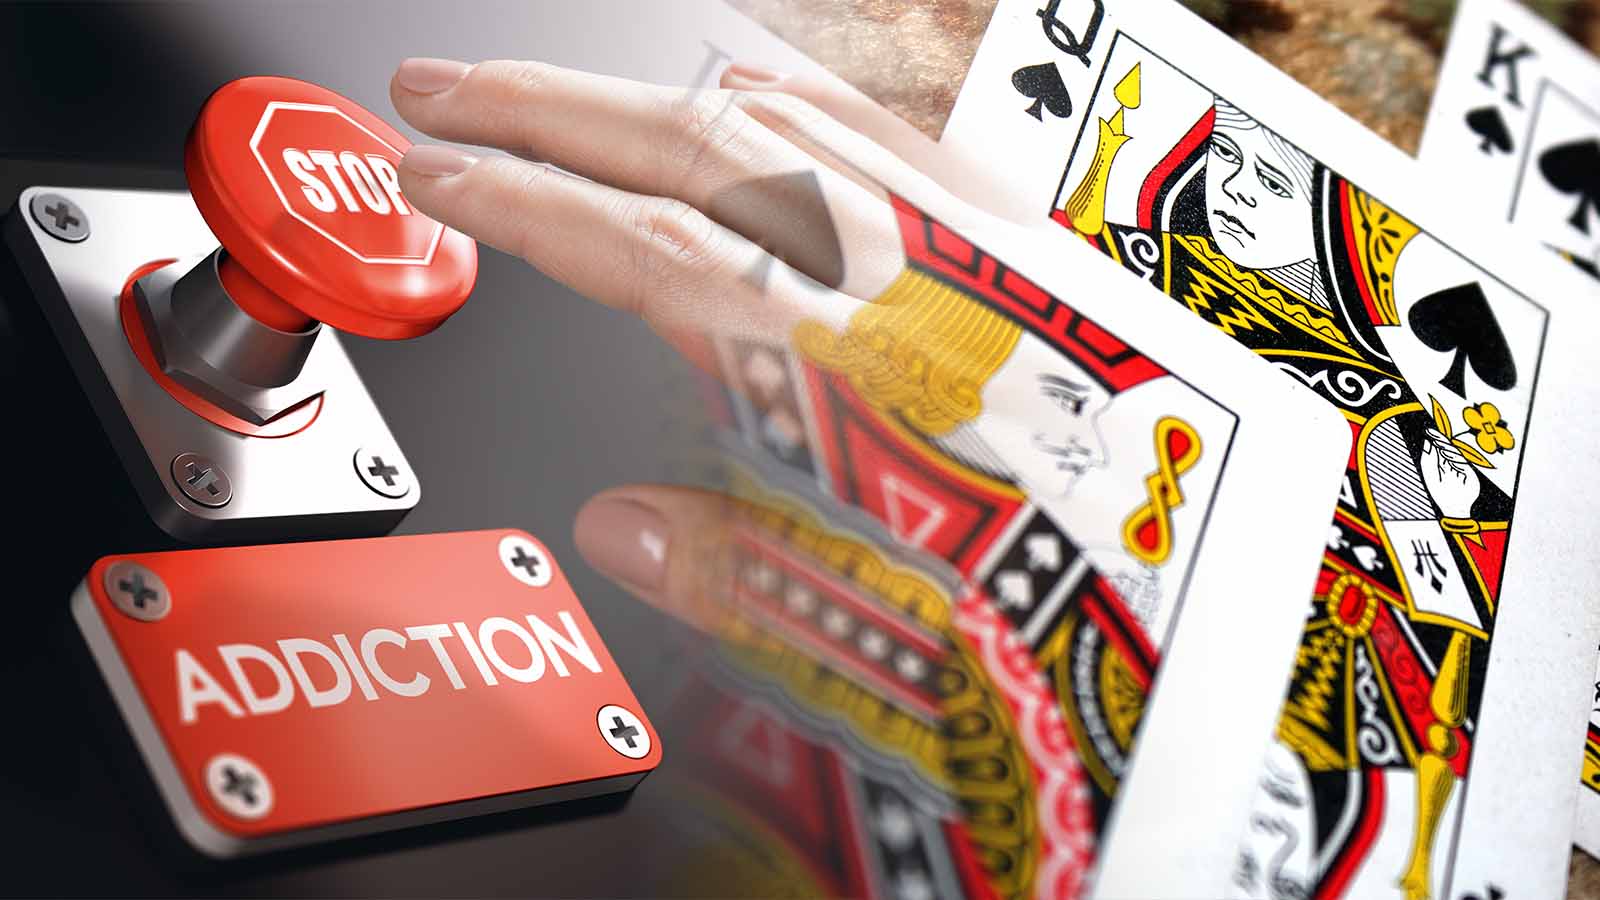 How to stop gambling addiction - Advice from gambling experts